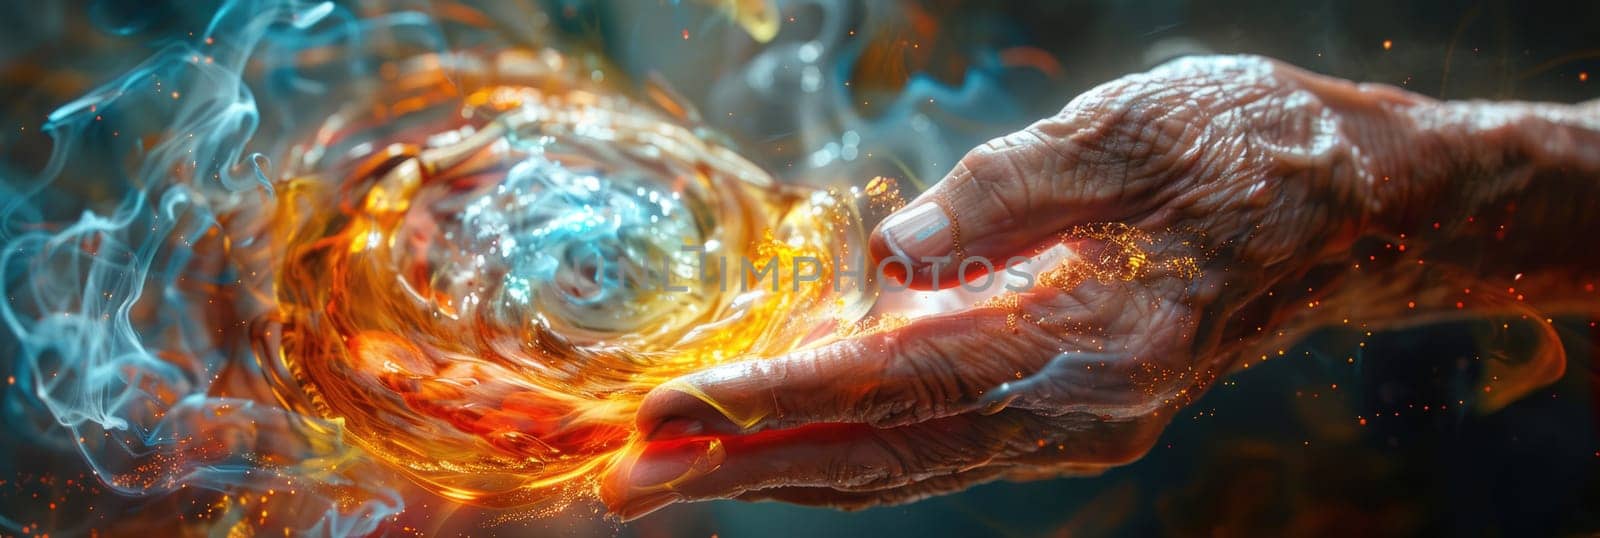 Hand Holding Ball of Fire and Water by but_photo